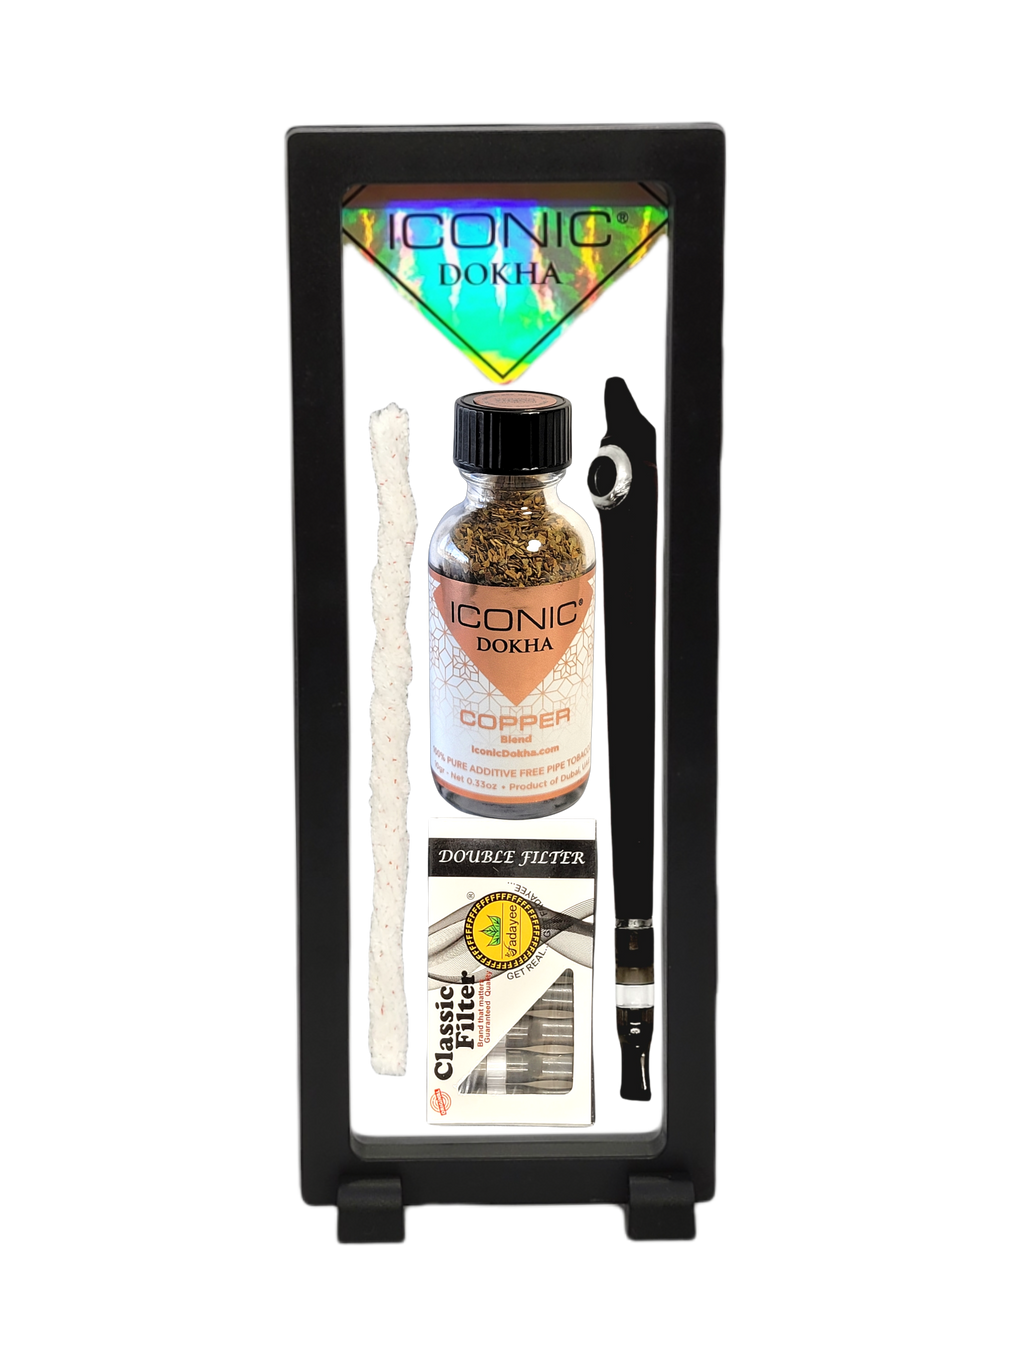 The Most Powerful Dokha Tobacco know to man. Dokha Tobacco from UAE. Six  blends of Dokha.